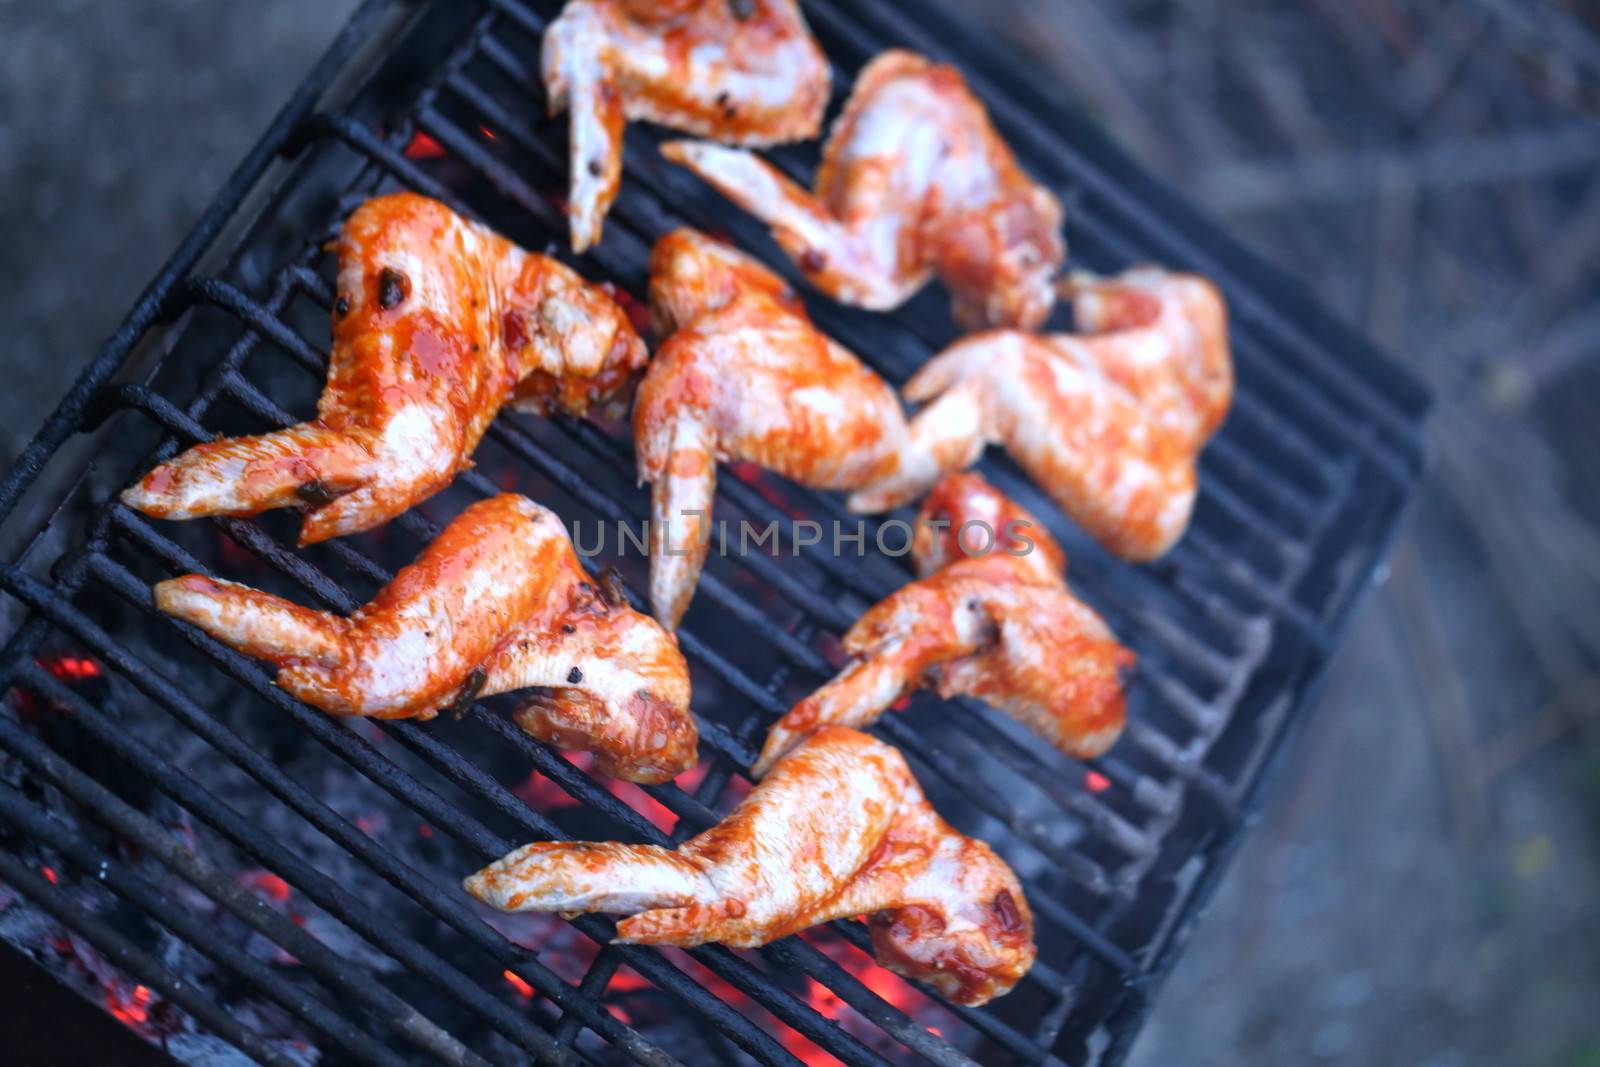  chicken wings being cooked on an outdoor barbeque by indigolotos